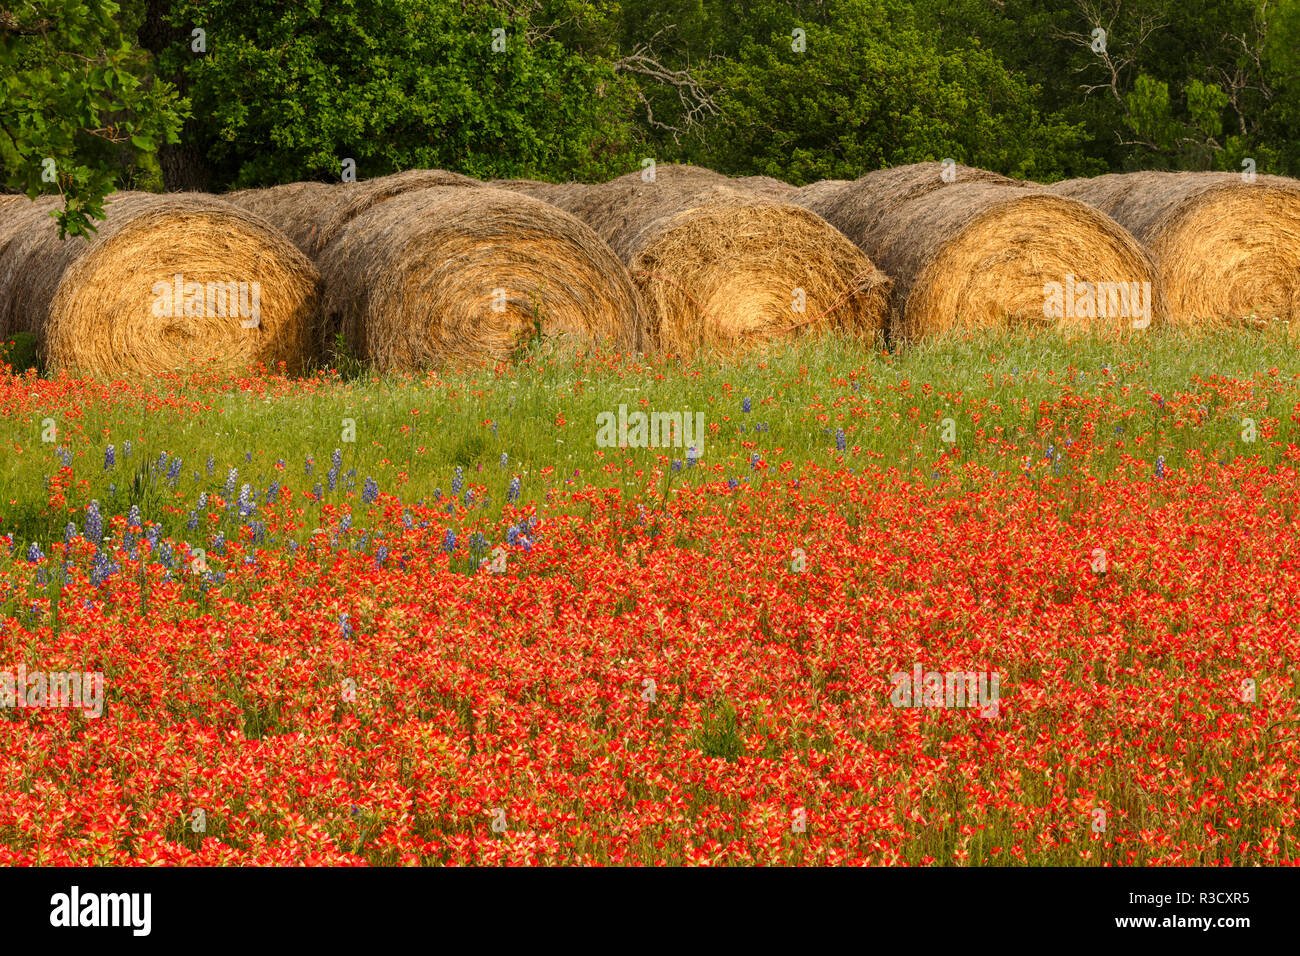 Hay bales and red Texas paintbrush flowers, Texas hill country near Marble Falls, Llano, Texas Stock Photo